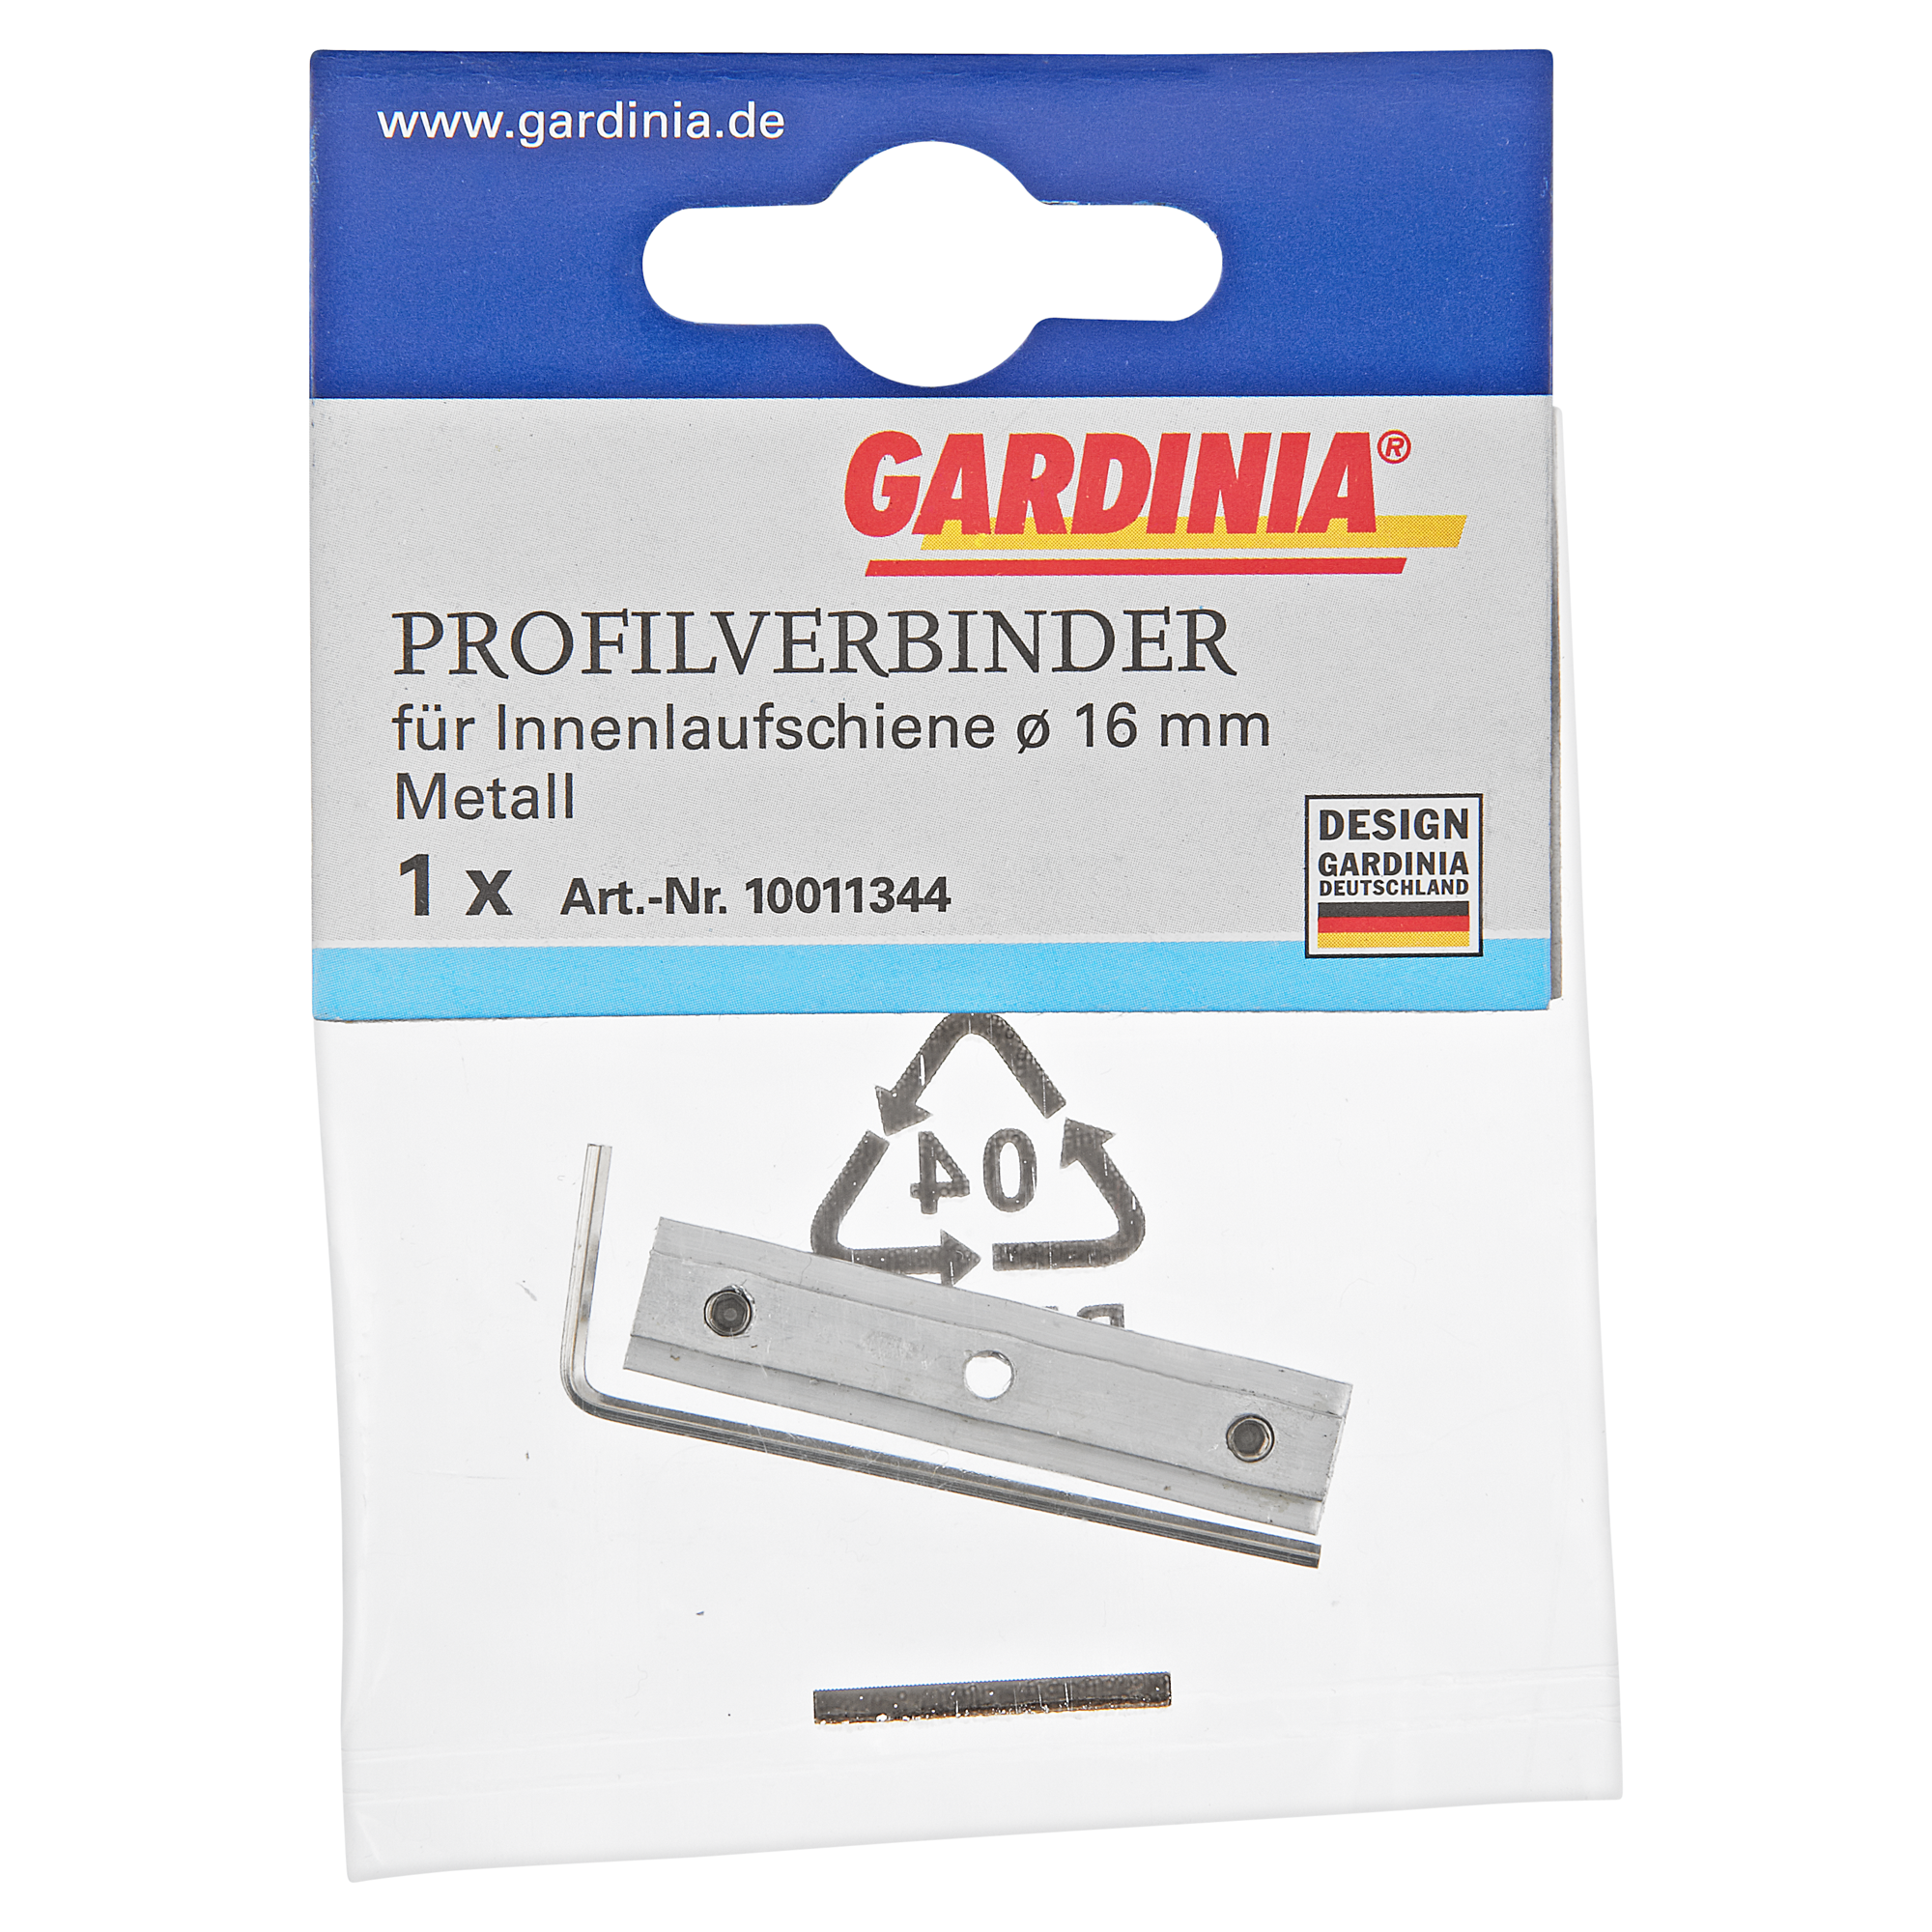 Profilverbinder + product picture